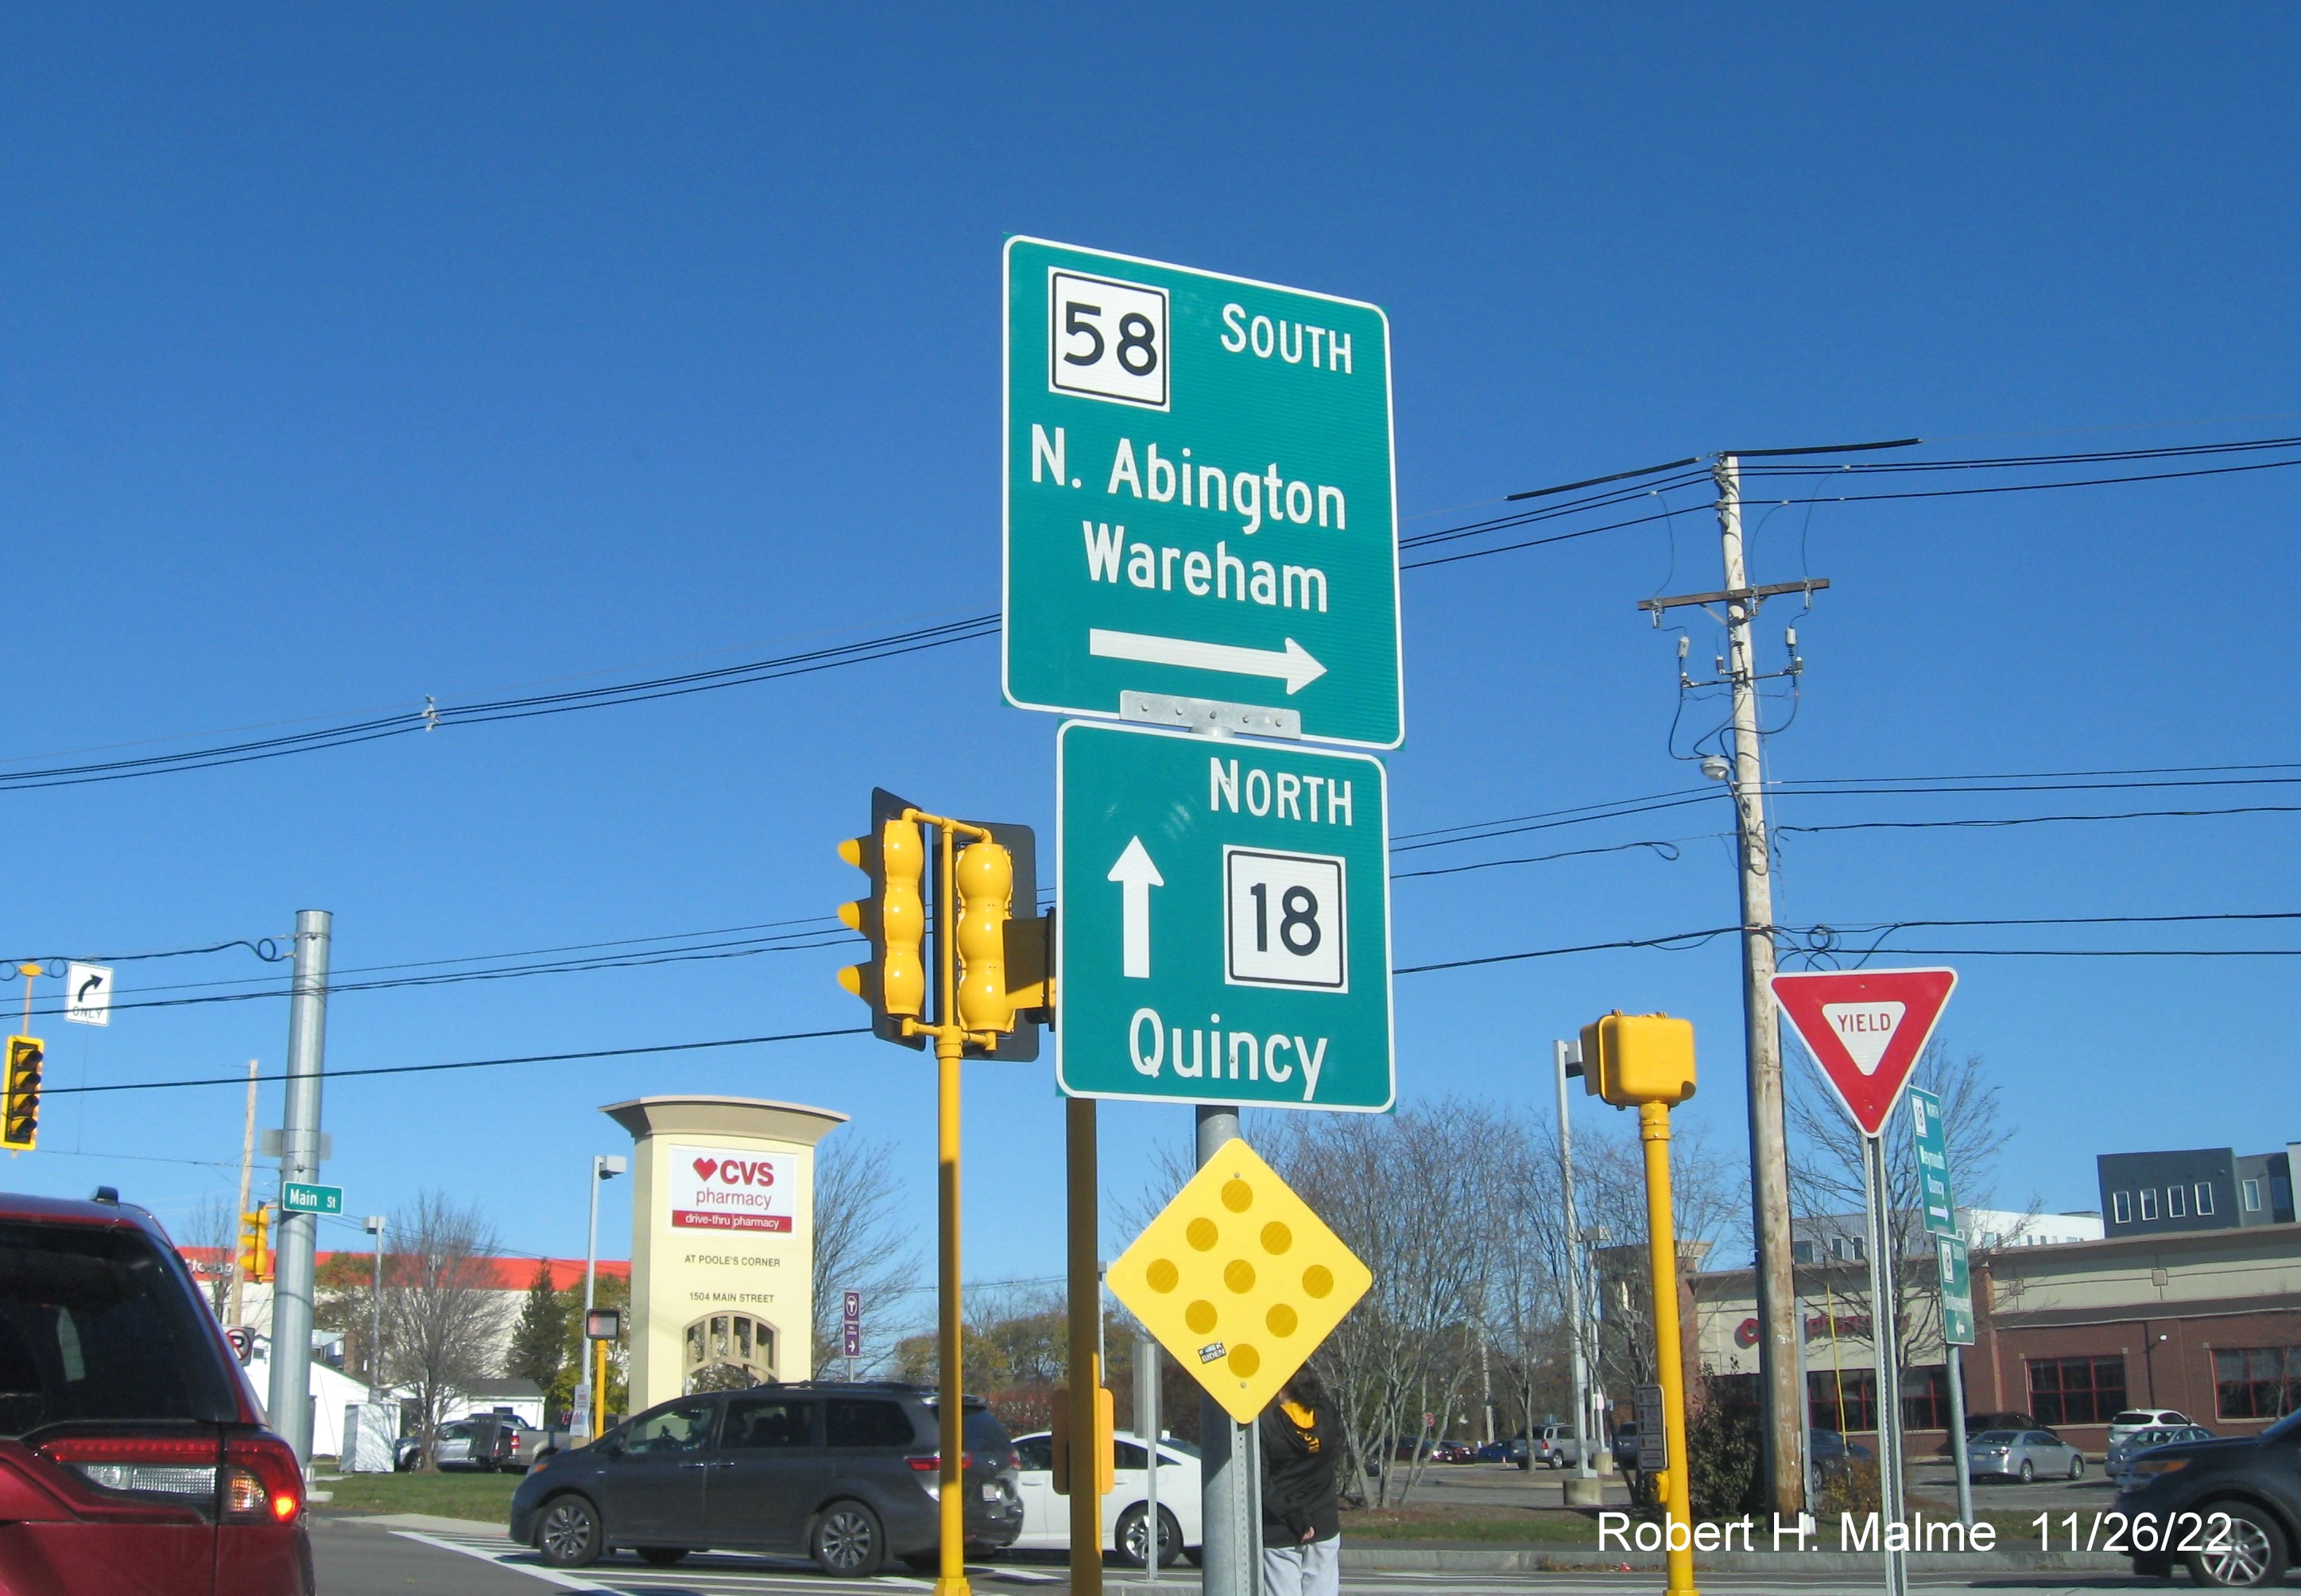 Image of guide signs at the start of MA 58 South in South Weymouth, November 2022